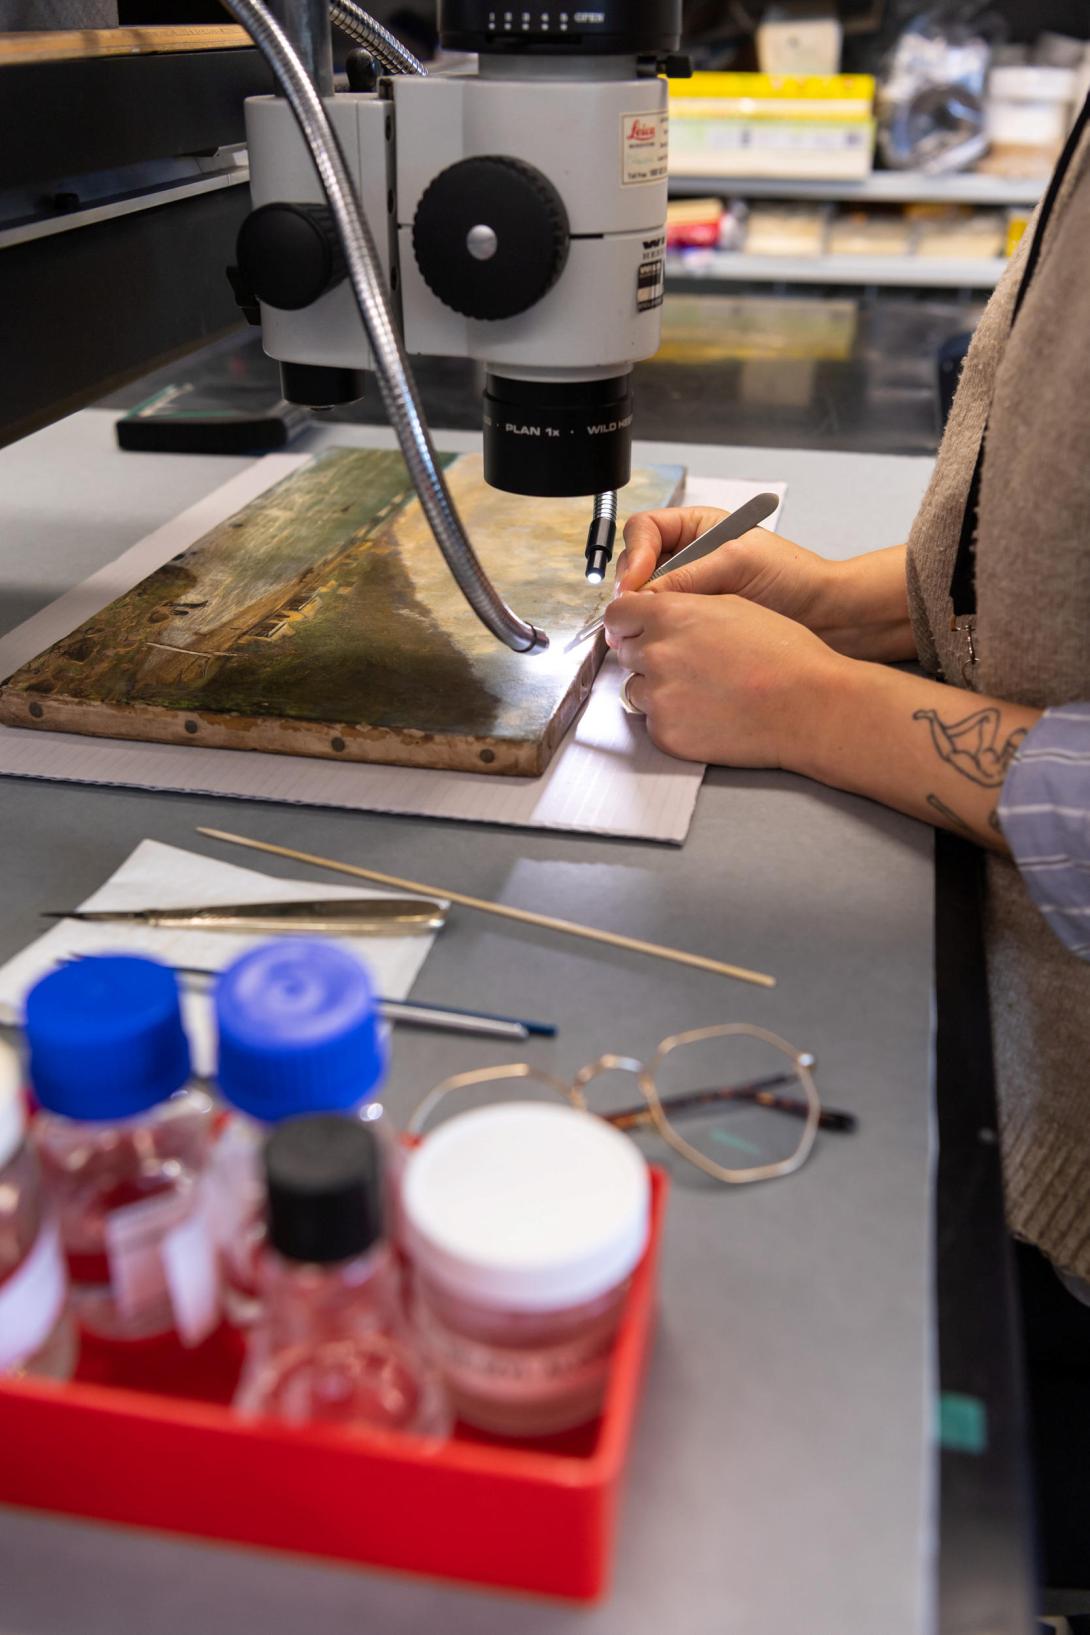 A conservator examines a painting under a microscope; we see only their hands, the equipment and, in the foreground, a red tray of jars containing various cleaning gels.